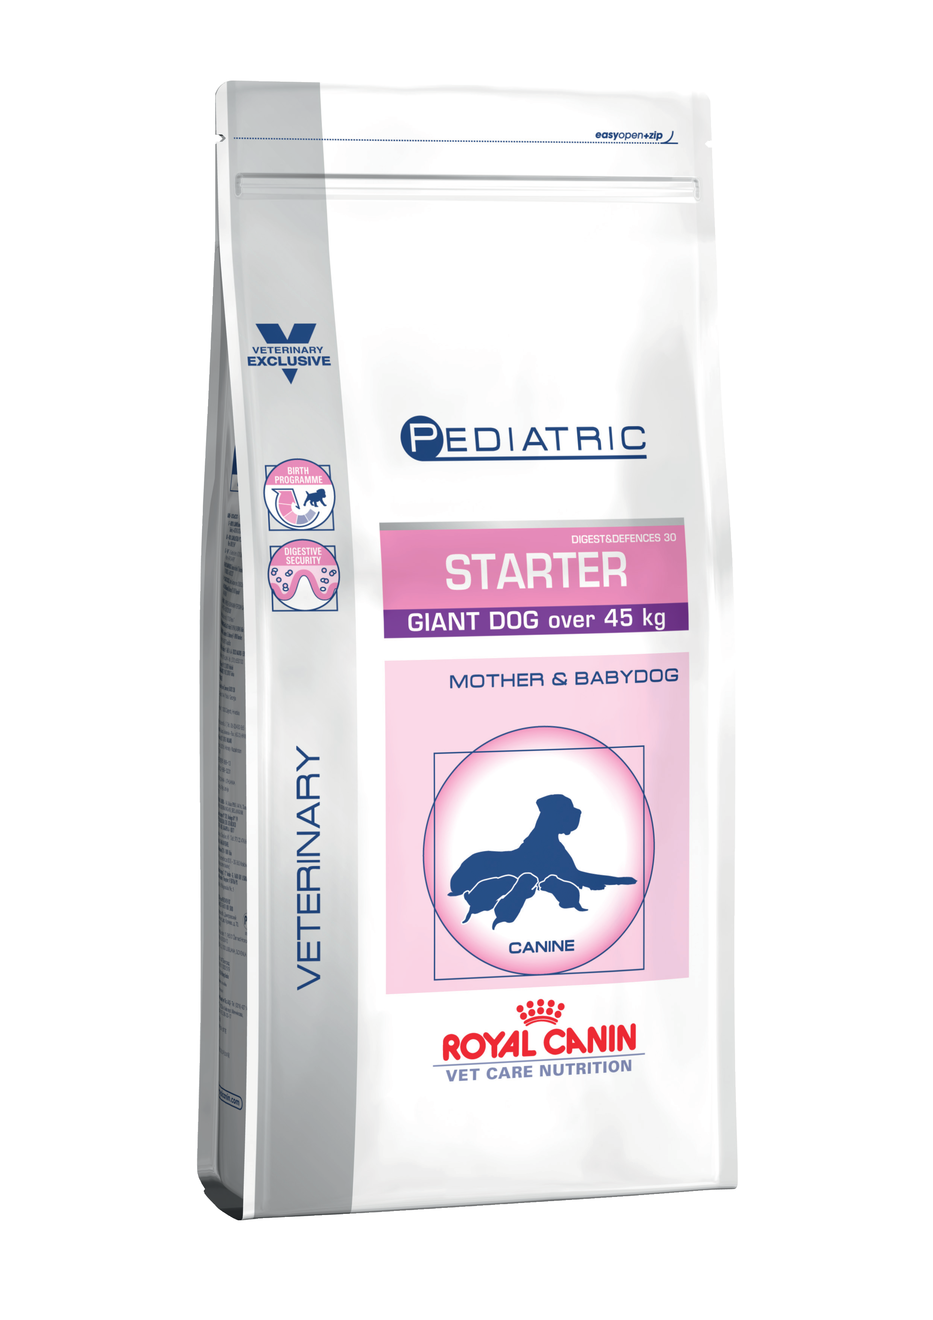 royal canin pediatric starter mother and baby dog